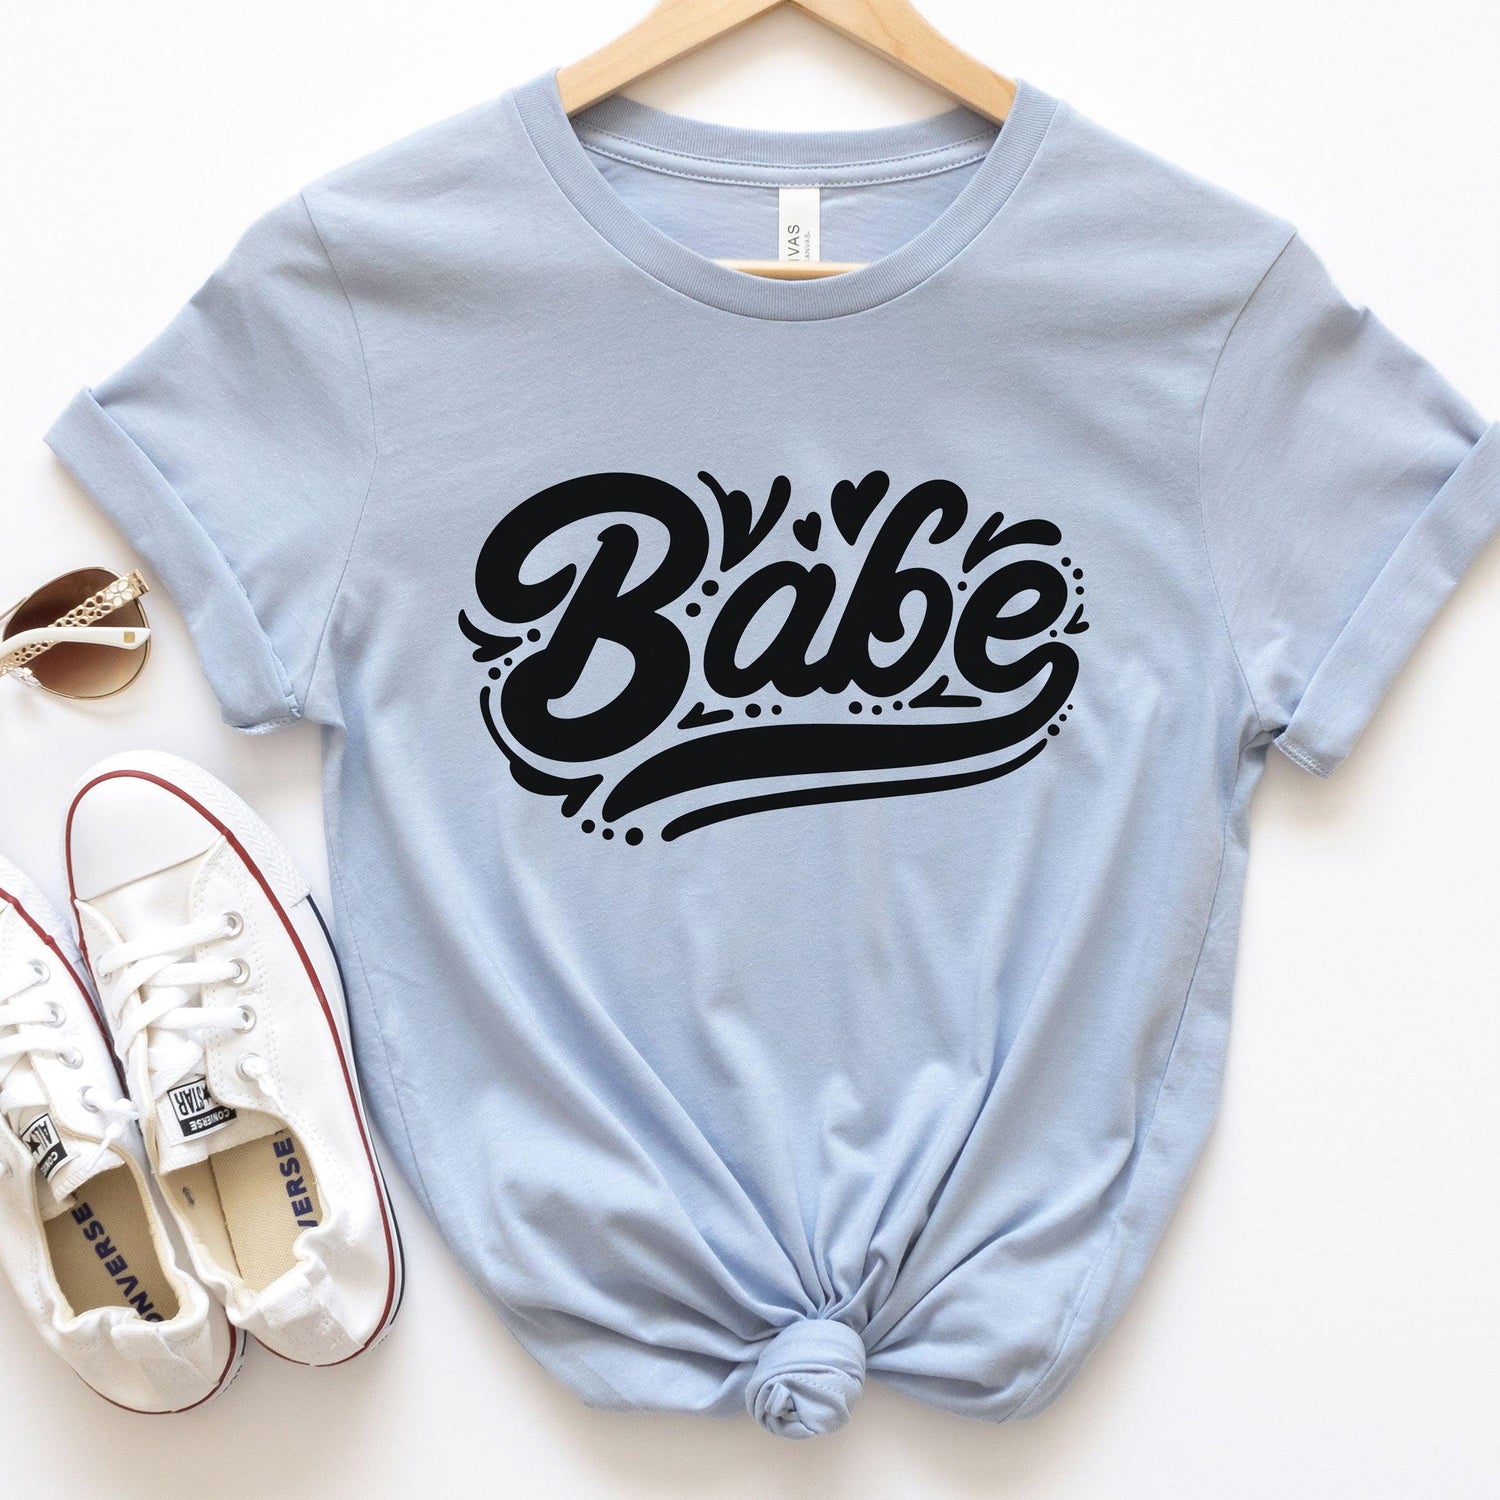 Babe - Wedding Party - Bach Party Short-sleeve Tee by Oaklynn Lane - In Light Blue - Dusty Blue - Bridesmaid Shirt